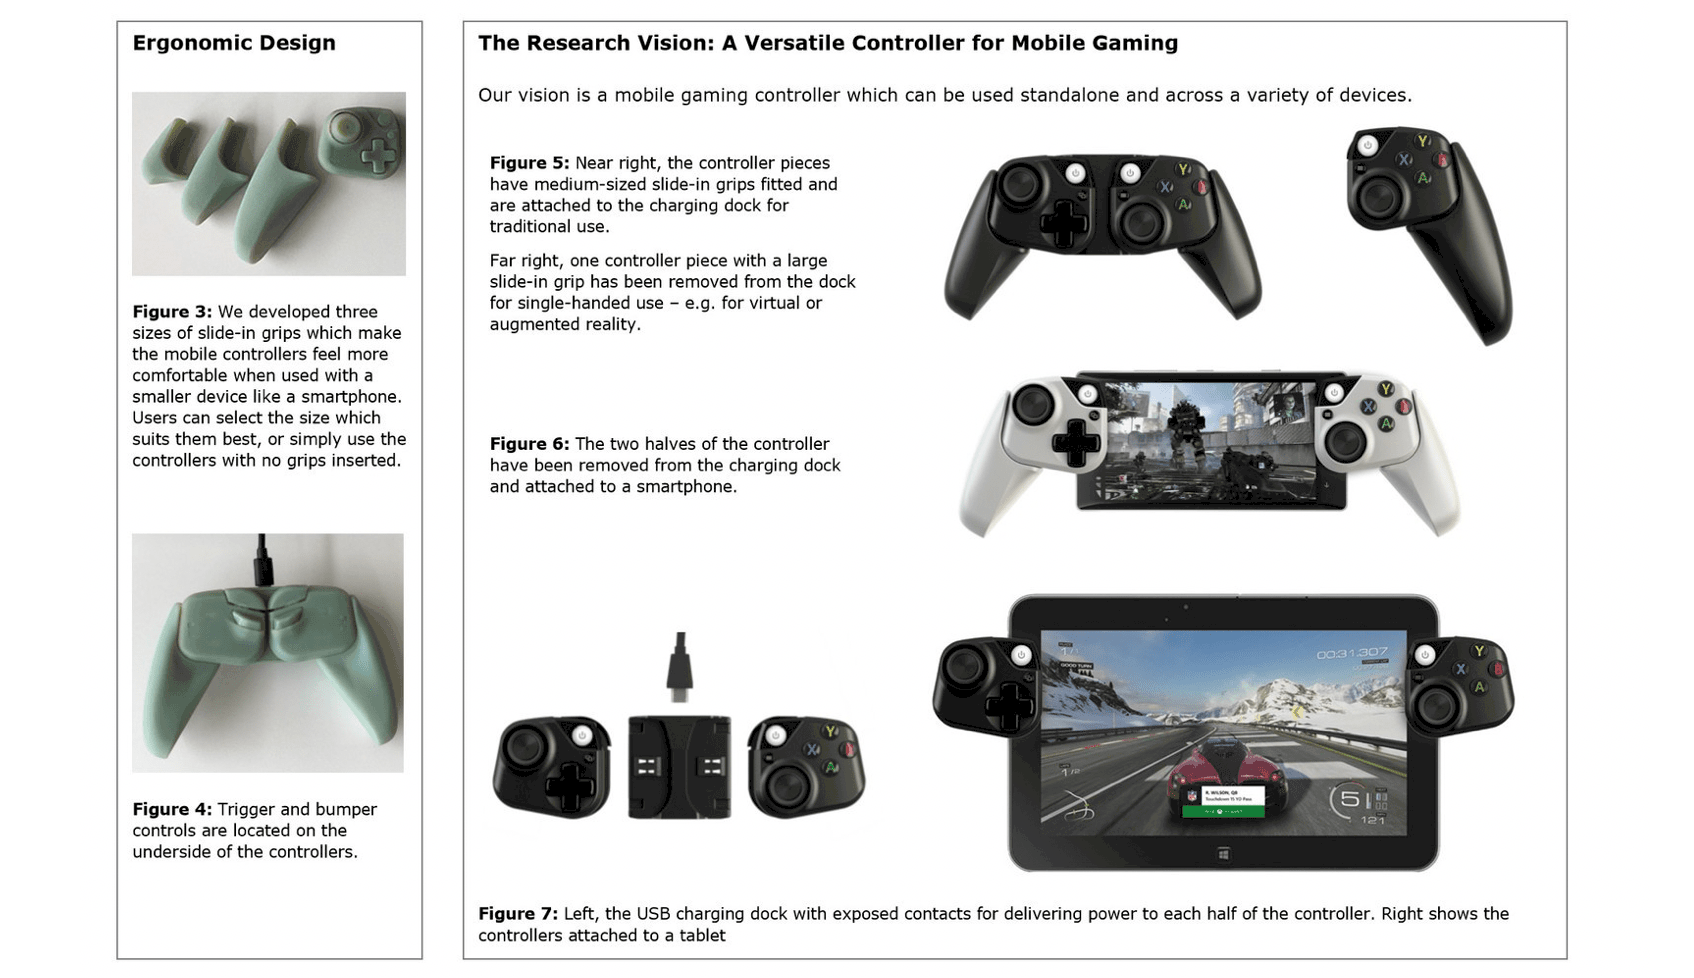 This patented mobile controller from microsoft may bring console quality gaming to your phone - onmsft. Com - july 9, 2019